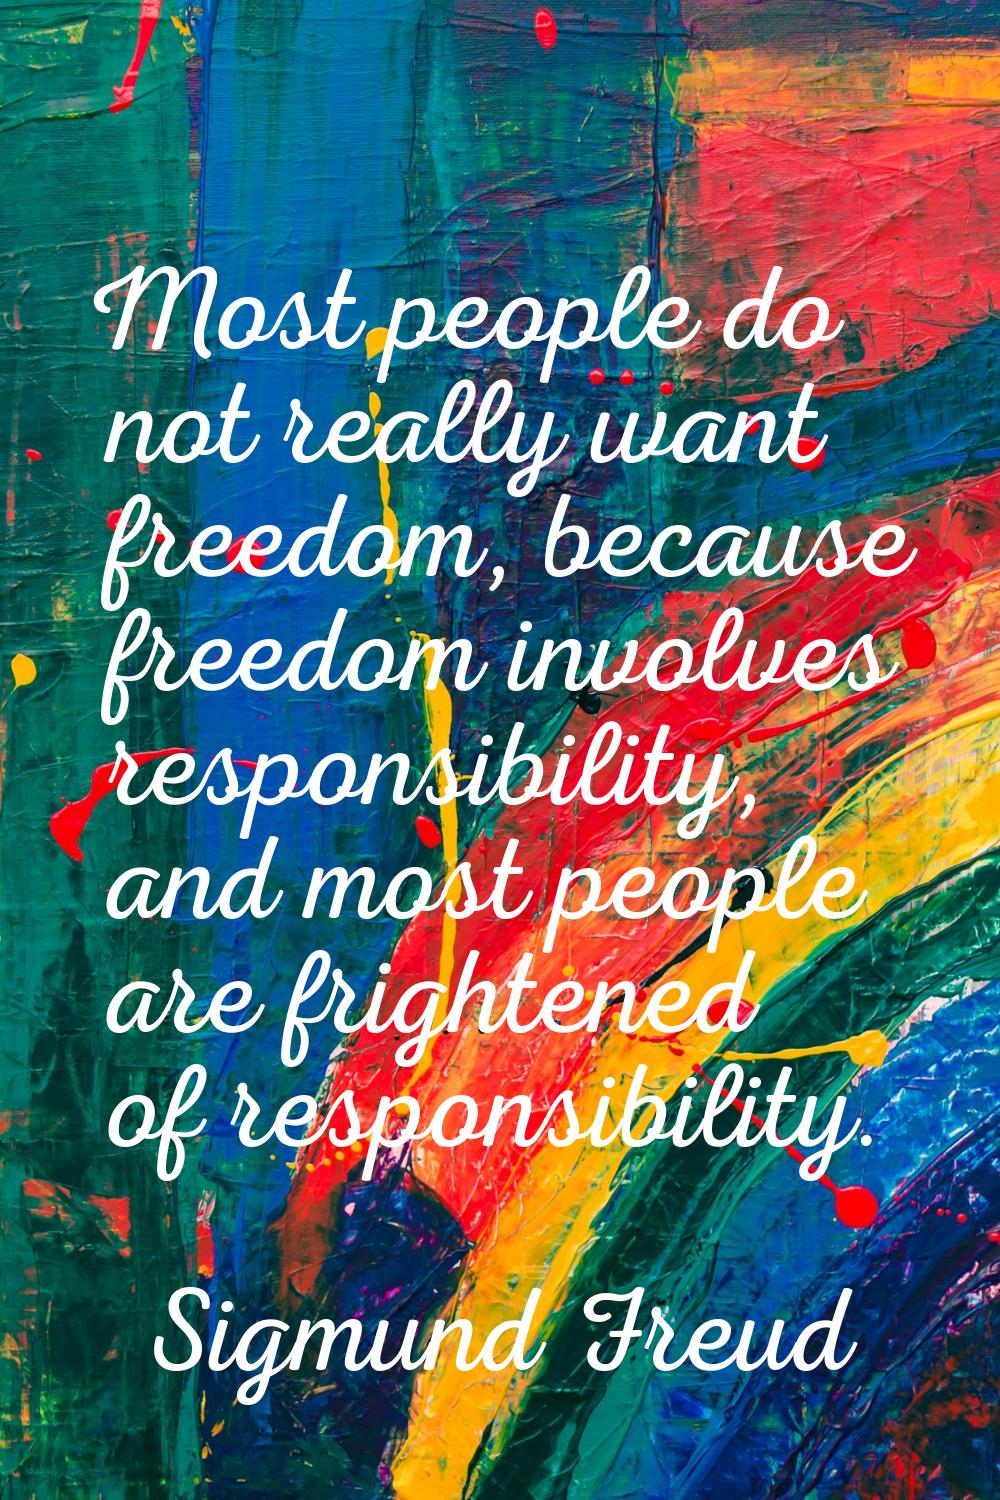 Most people do not really want freedom, because freedom involves responsibility, and most people ar